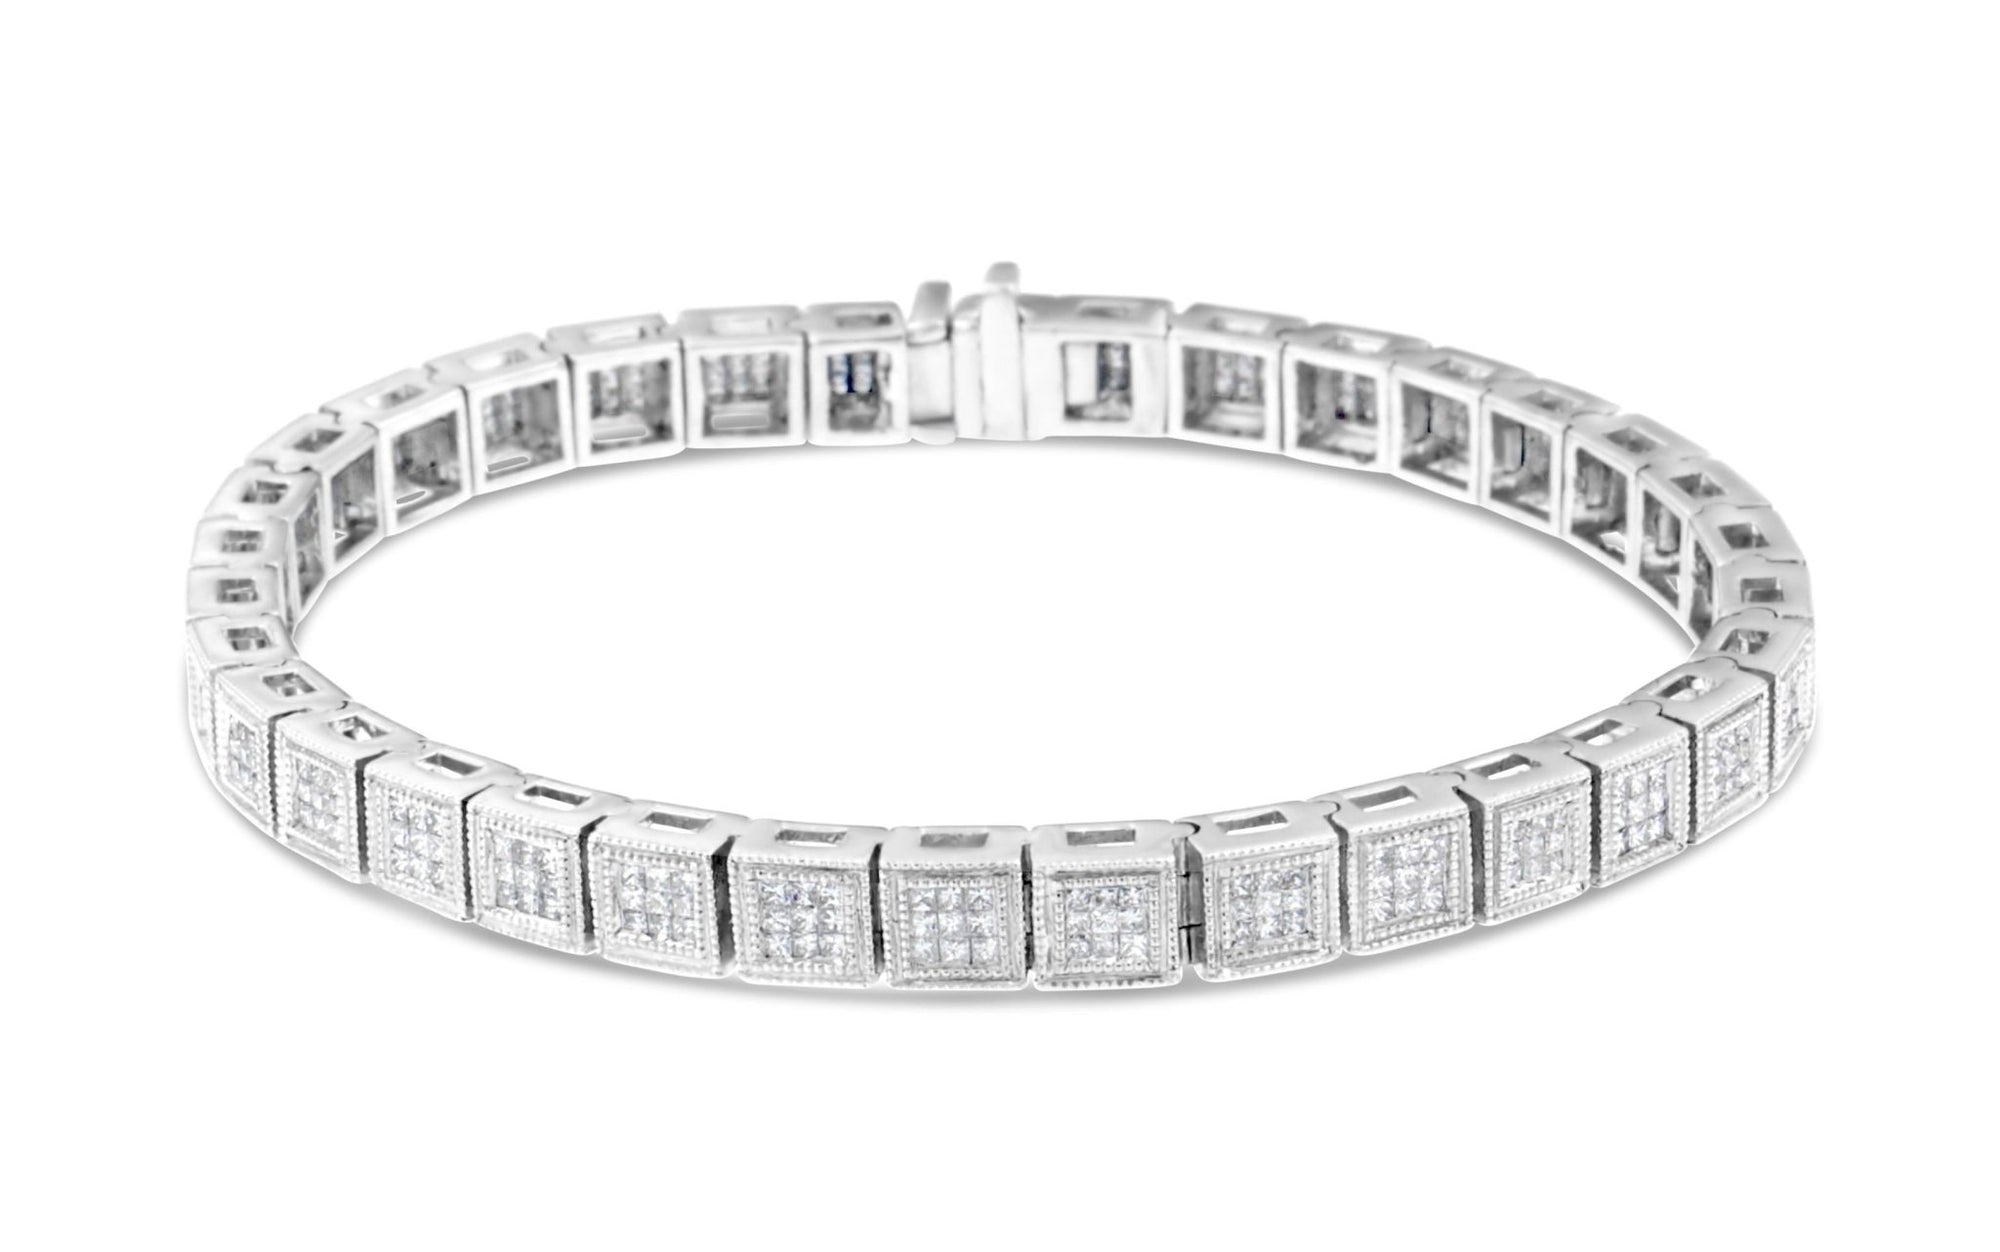 14K White Gold Princess Cut Diamond Cube Bracelet (2.86 cttw, H-I Color, SI1-SI2 Clarity) - LinkagejewelrydesignLinkagejewelrydesign